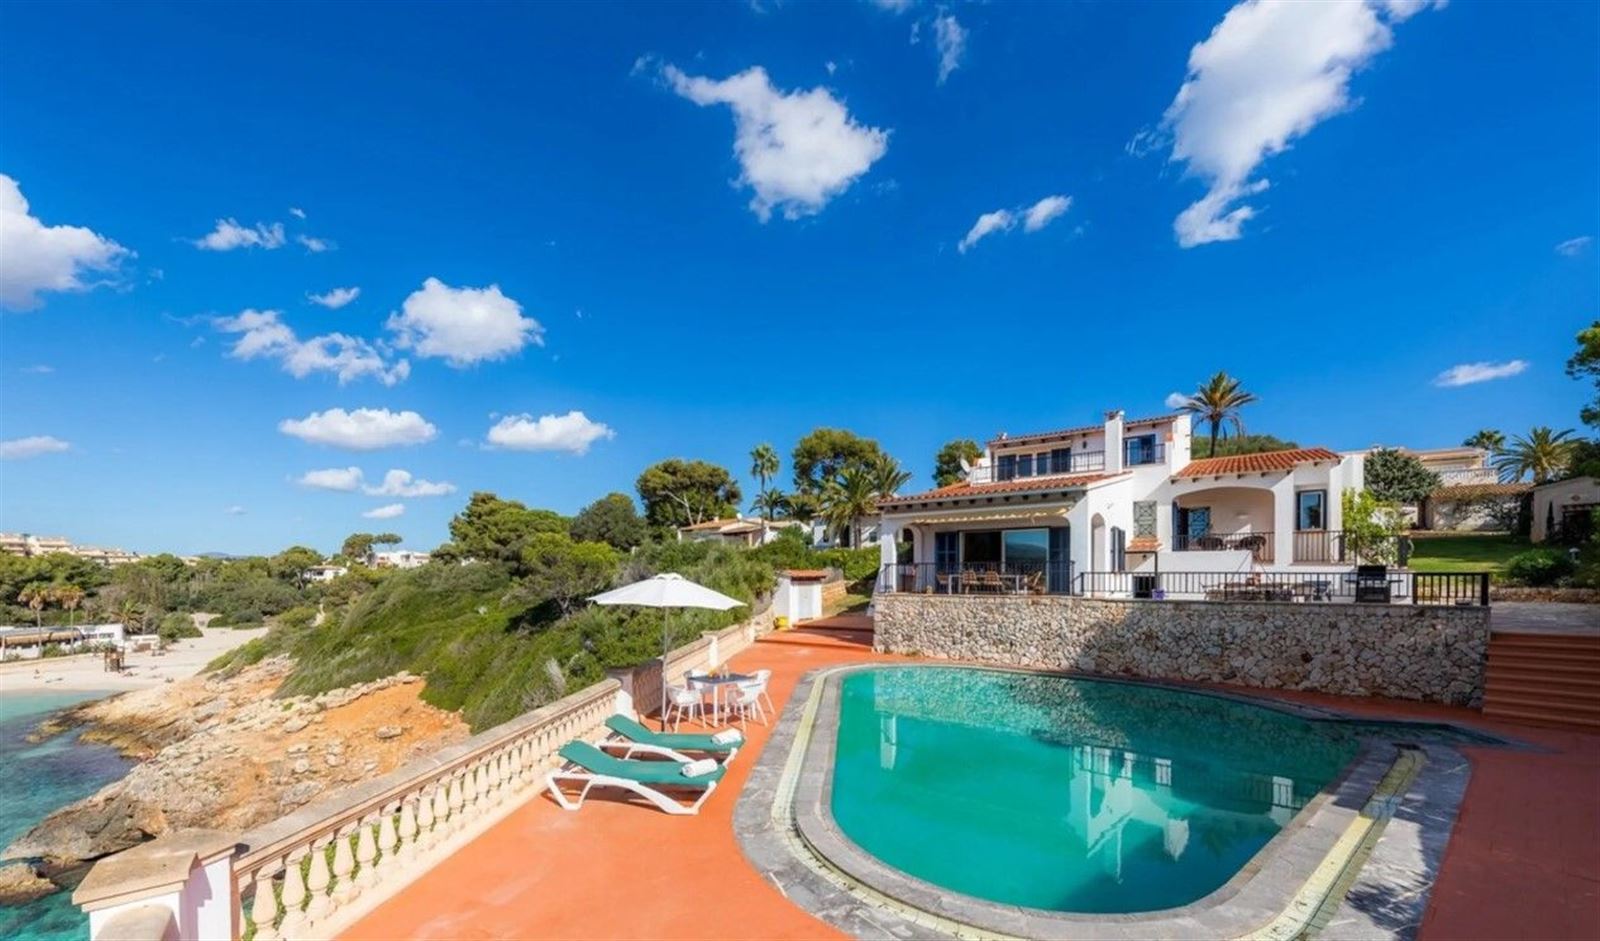 INDEPENDENT HOUSE OR VILLA IN CALA ANGUILA